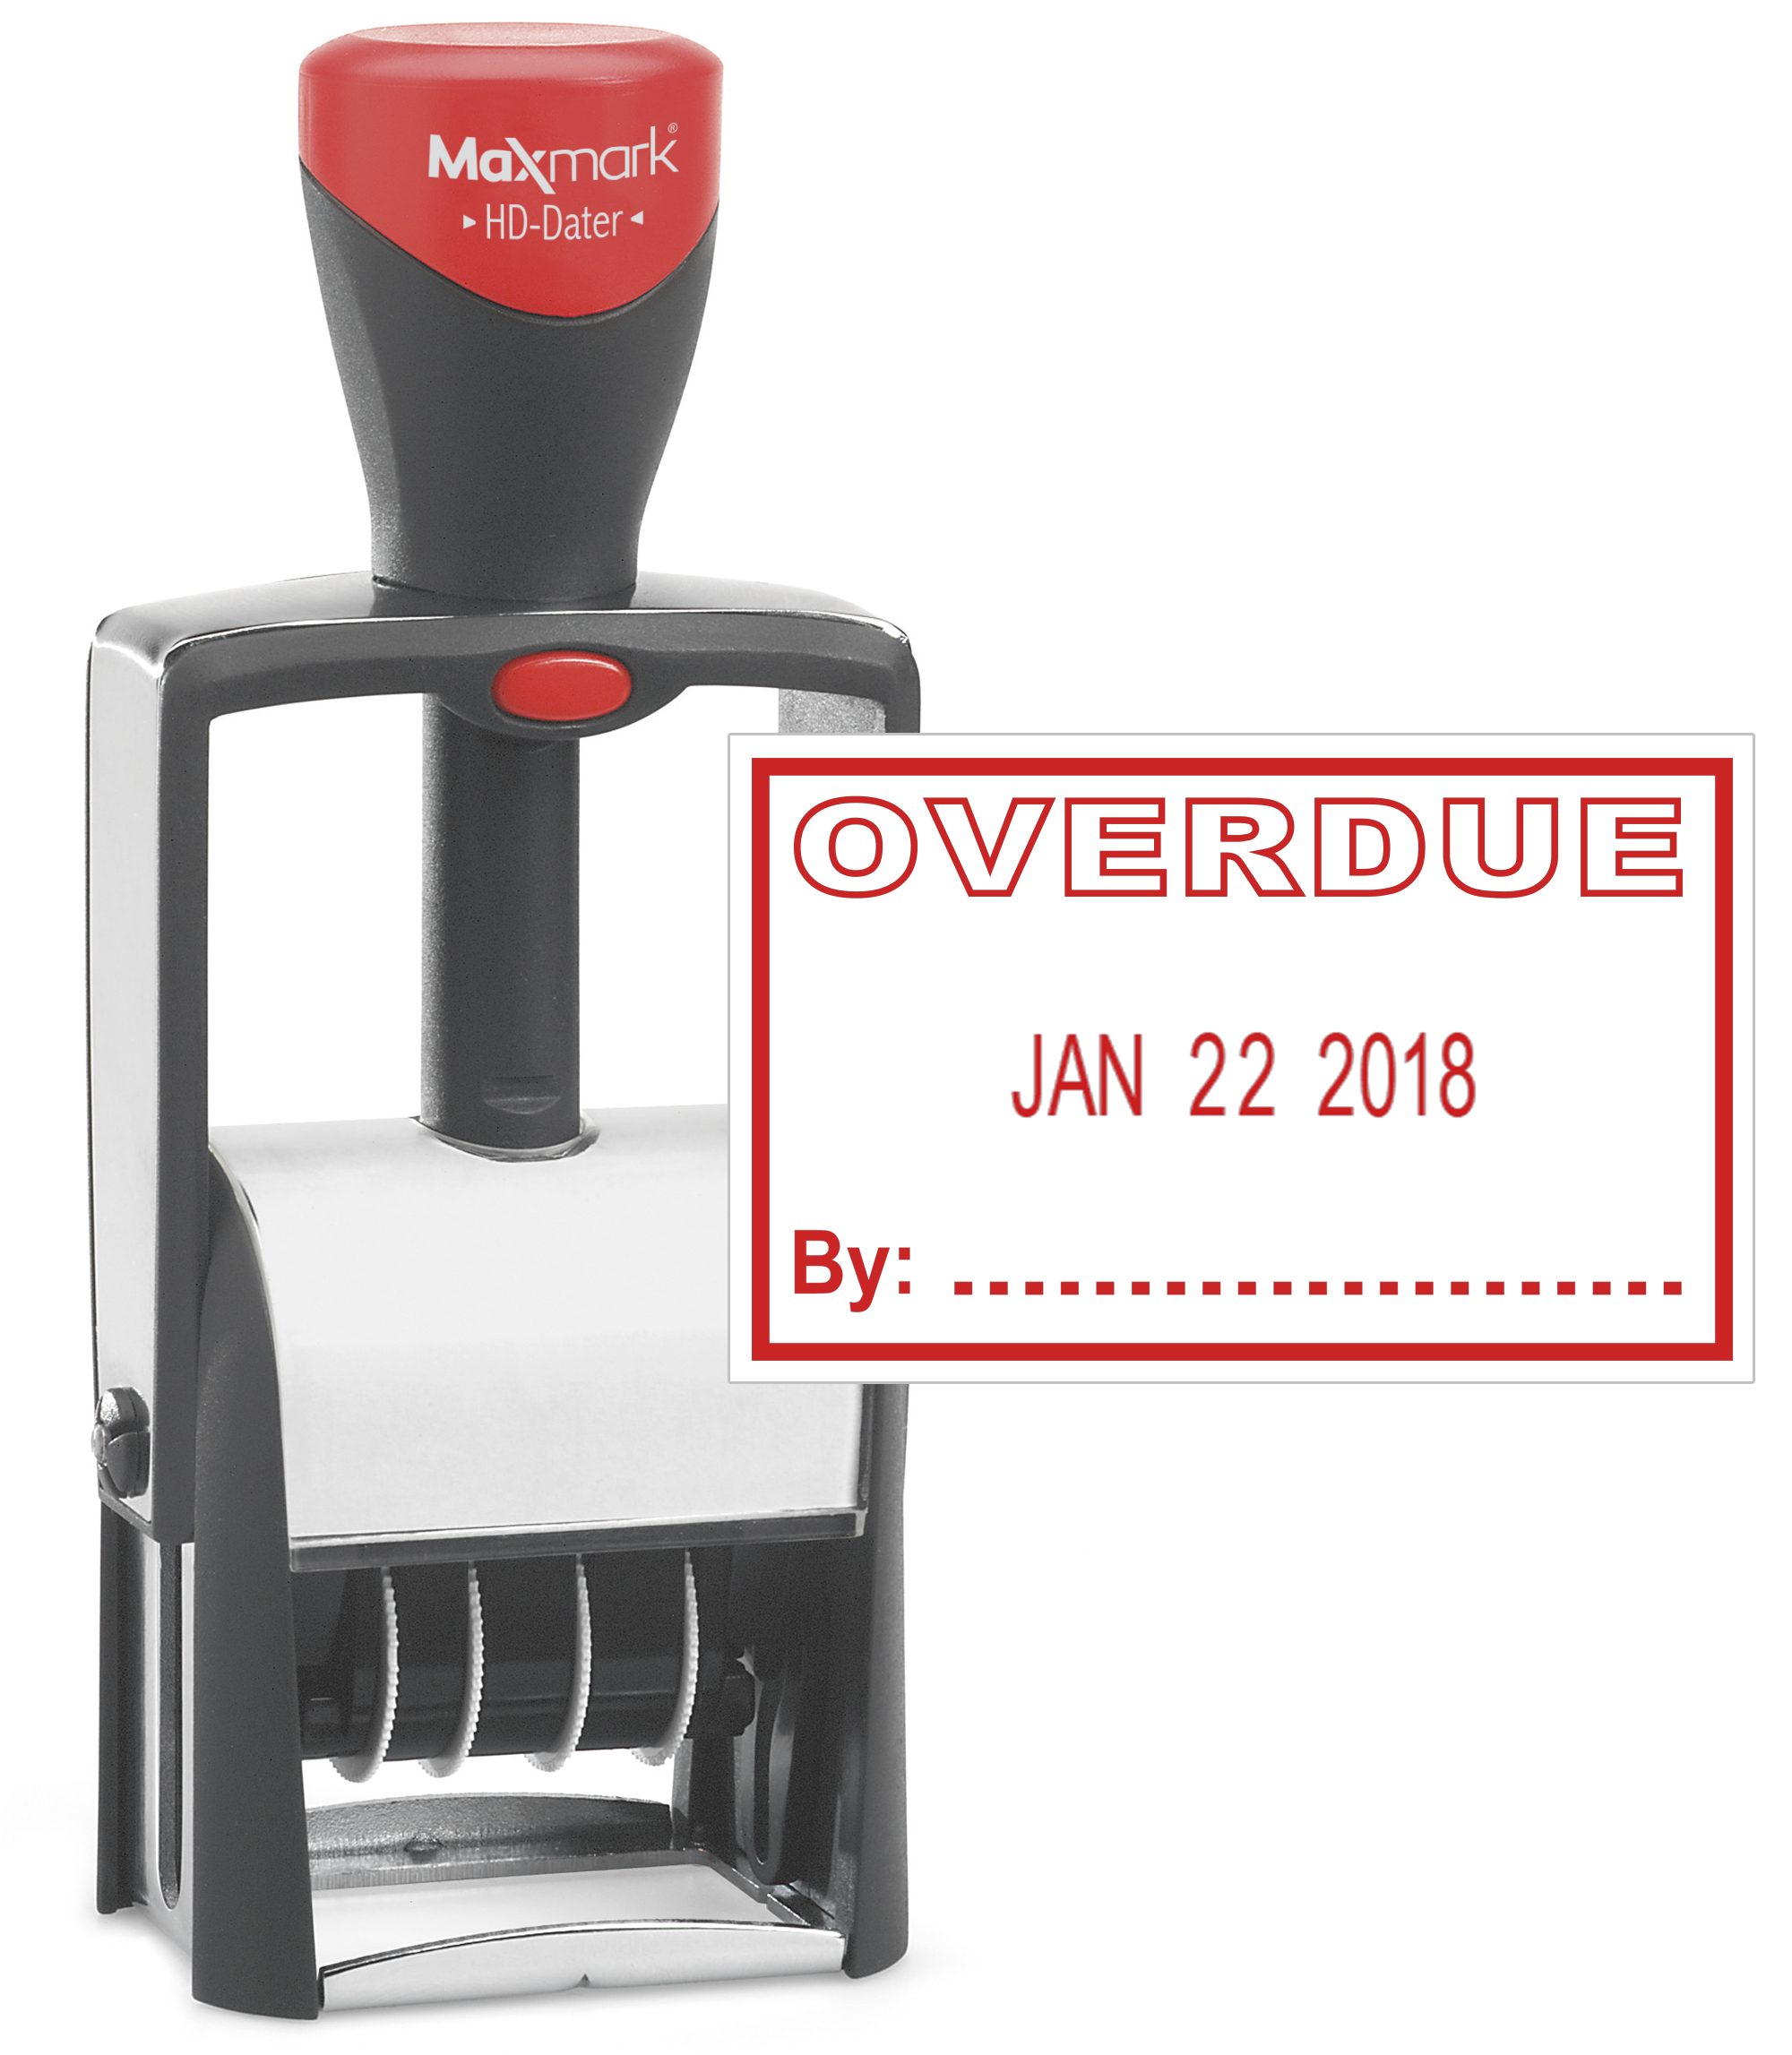 Heavy Duty Date Stamp with "OVERDUE" Self Inking Stamp - RED Ink